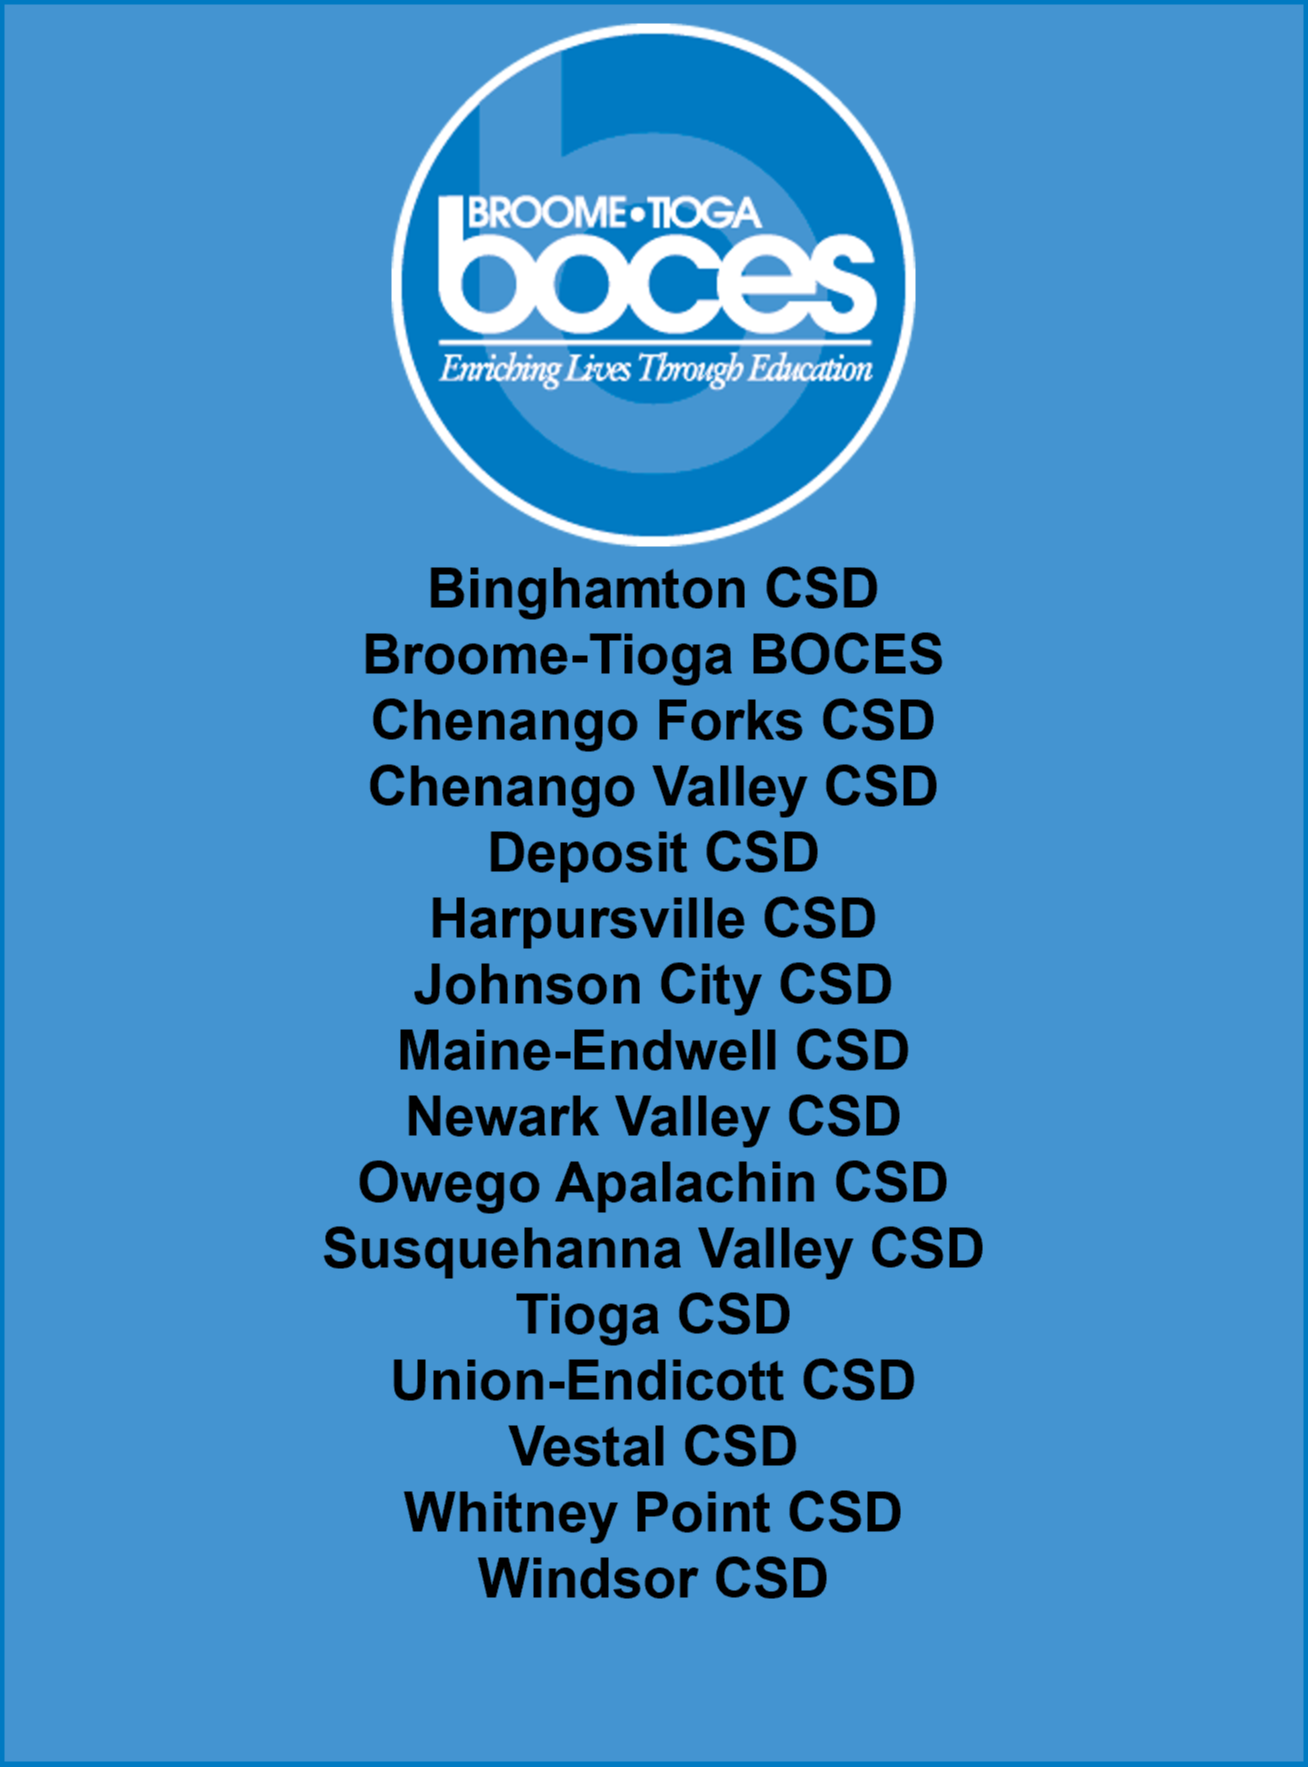 BTBOCES logo with supported districts listed underneath